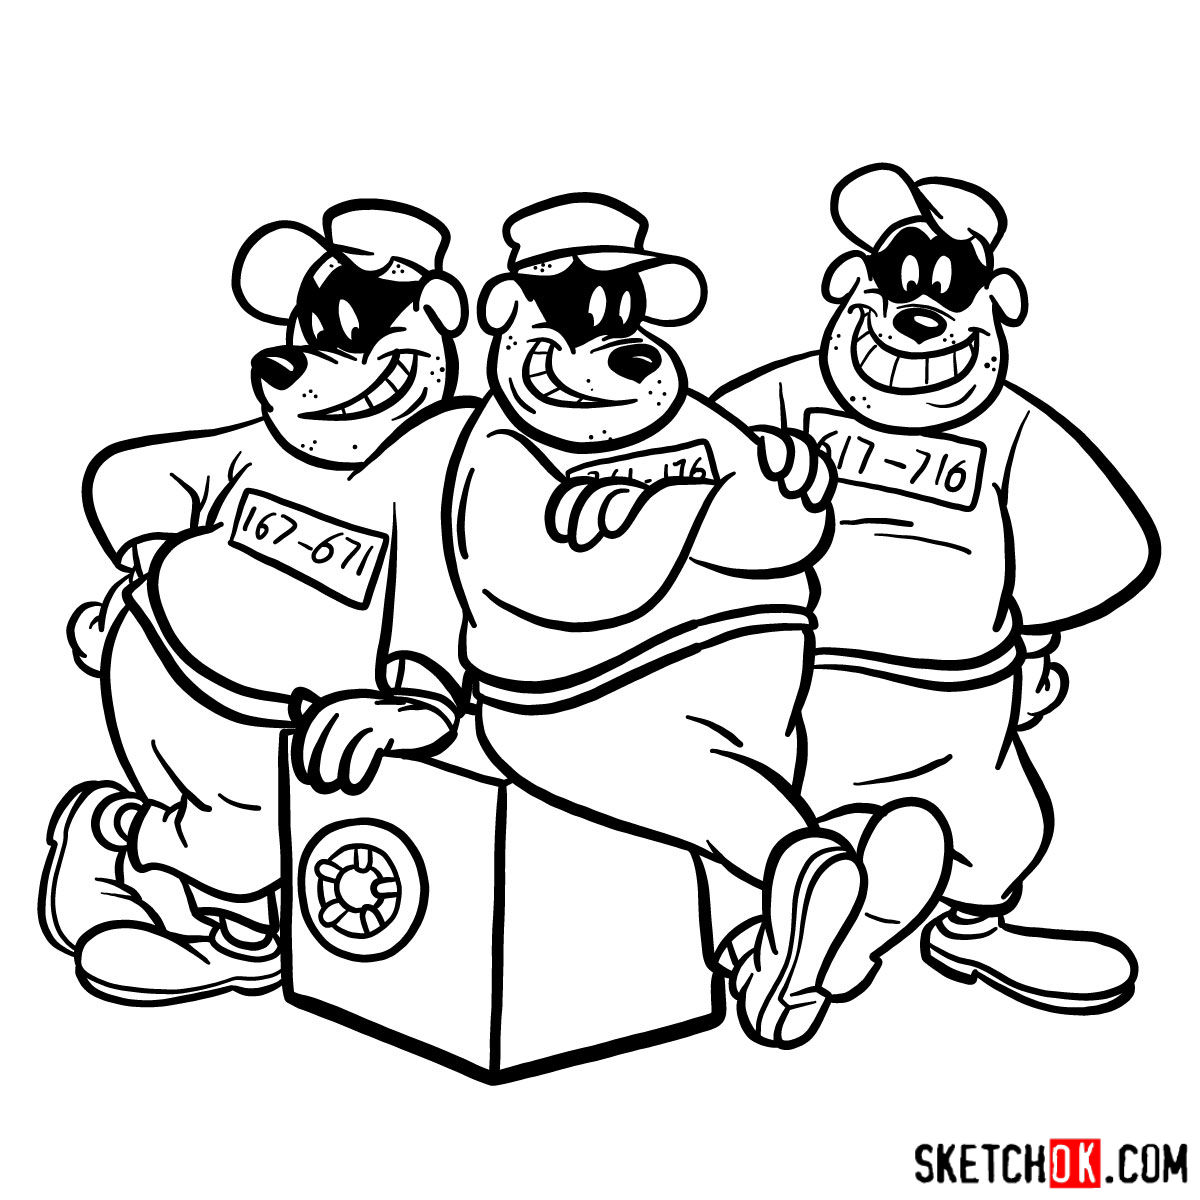 How to draw The Beagle Boys - step 19